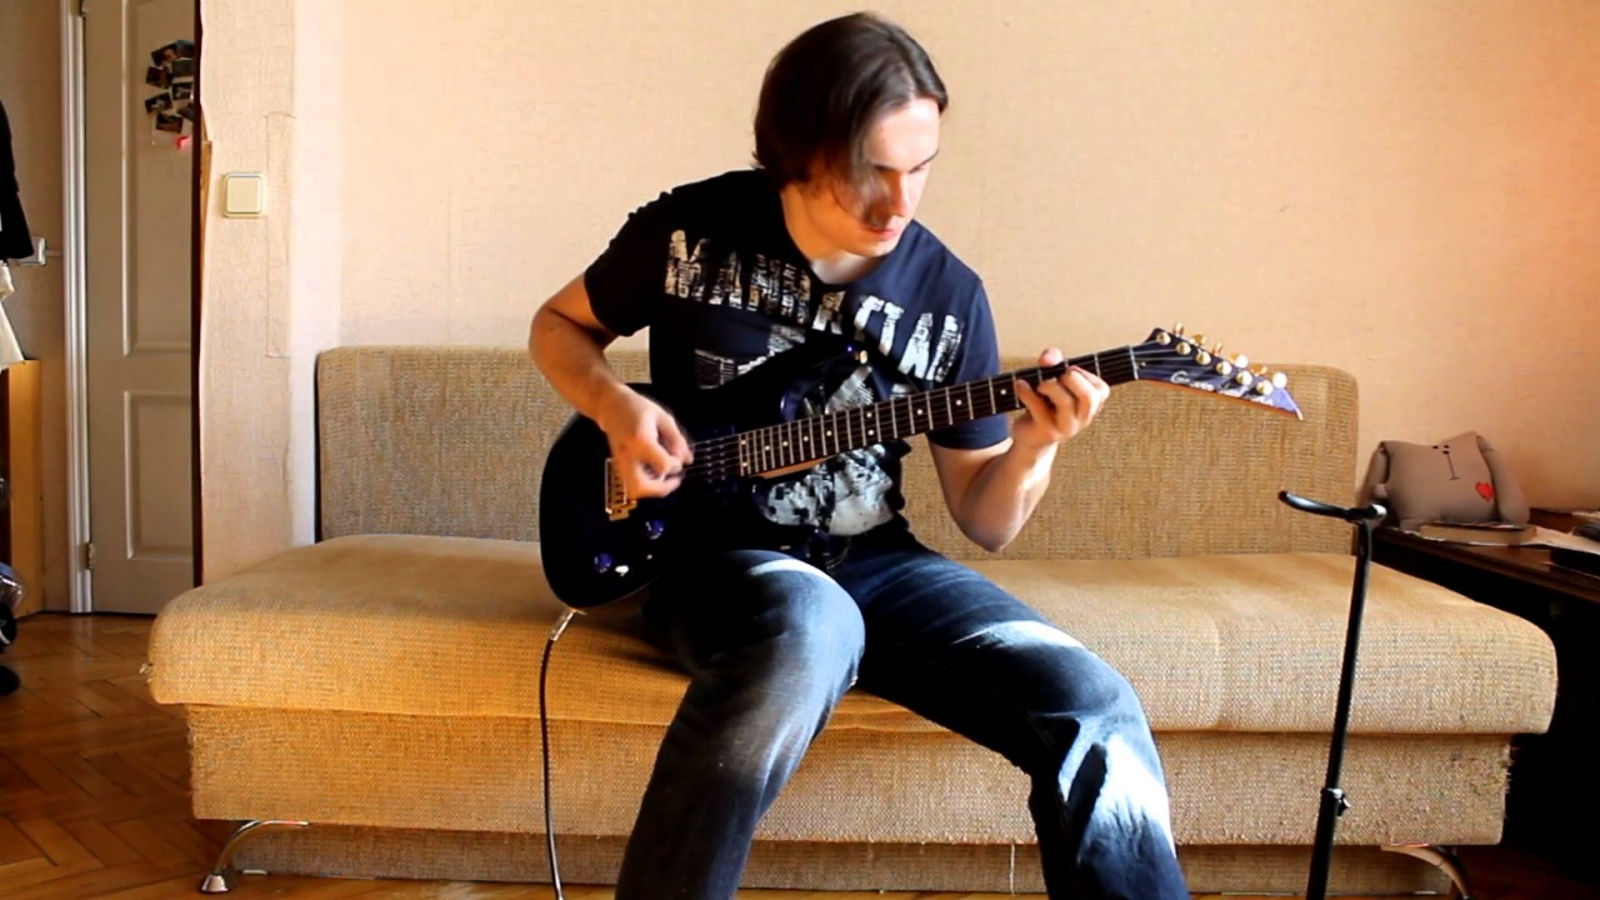 J. Trebountsov - "Don't keep your love in disguise" main riff (Action cover)___Line 6 POD HD500